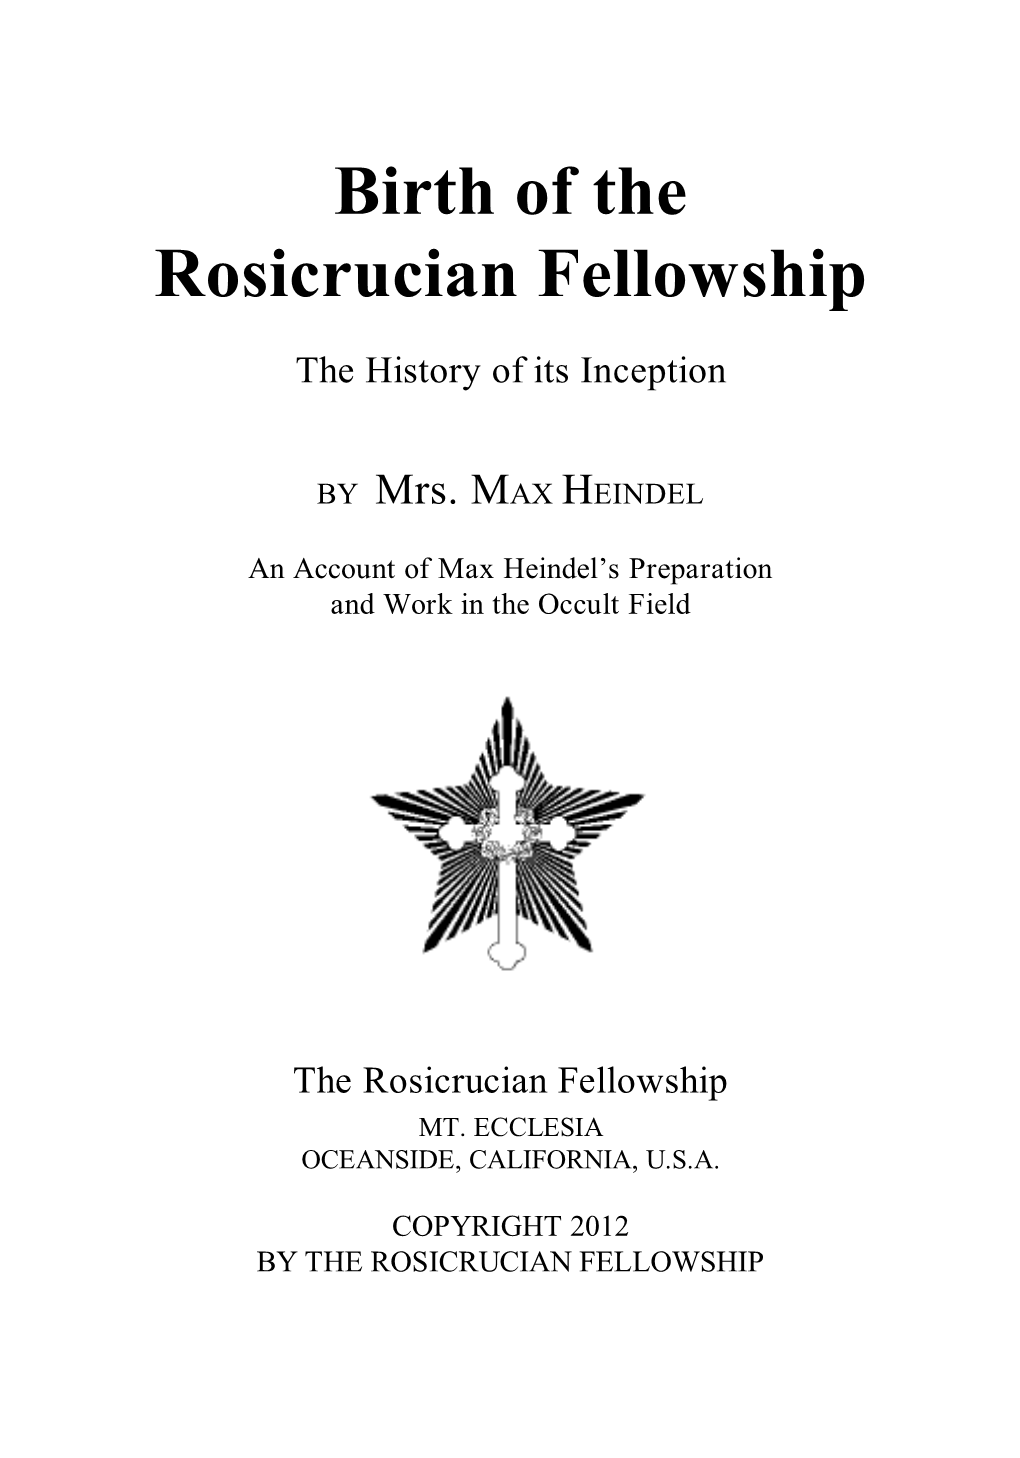 Birth of the Rosicrucian Fellowship (By Mrs. Max Heindel)